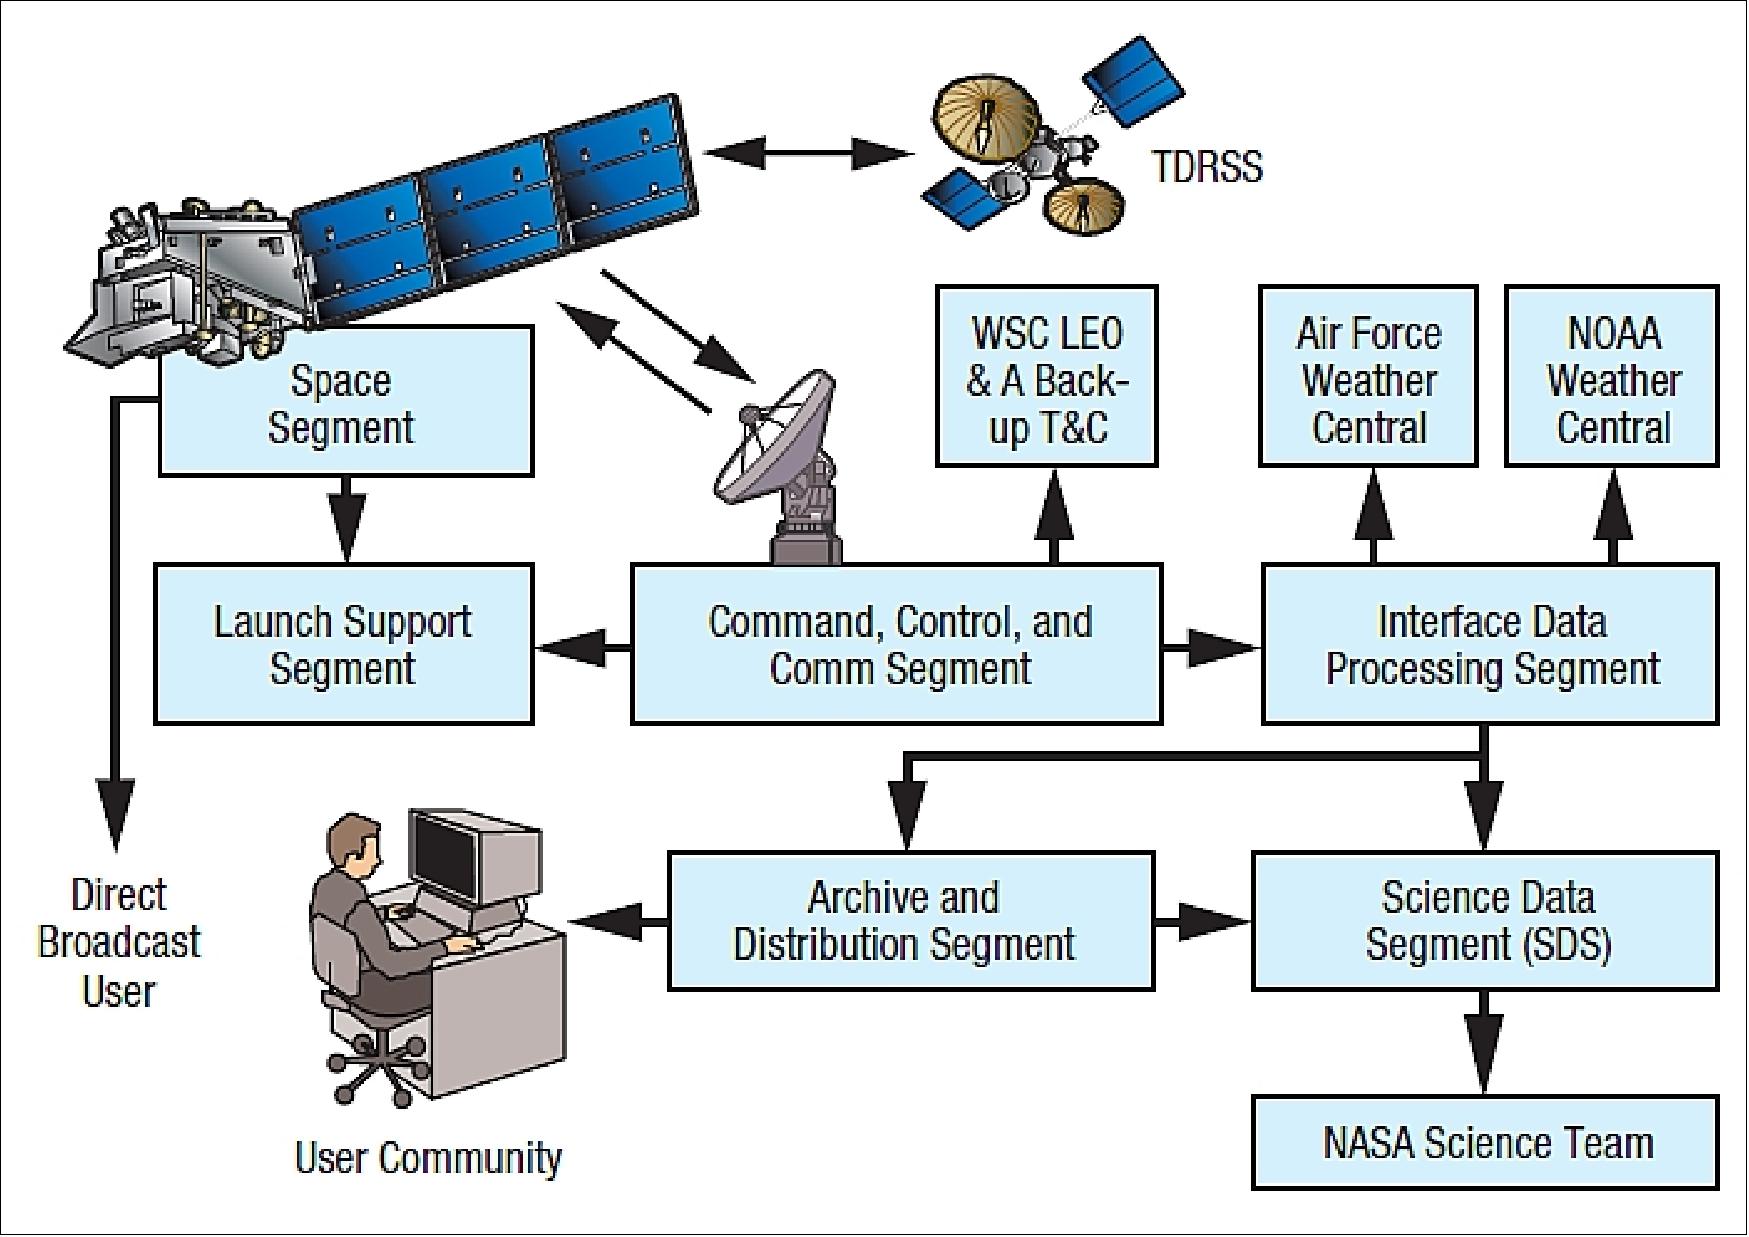 Figure 1: Overview of Suomi NPP mission segments and architecture (image credit: NASA) 11)